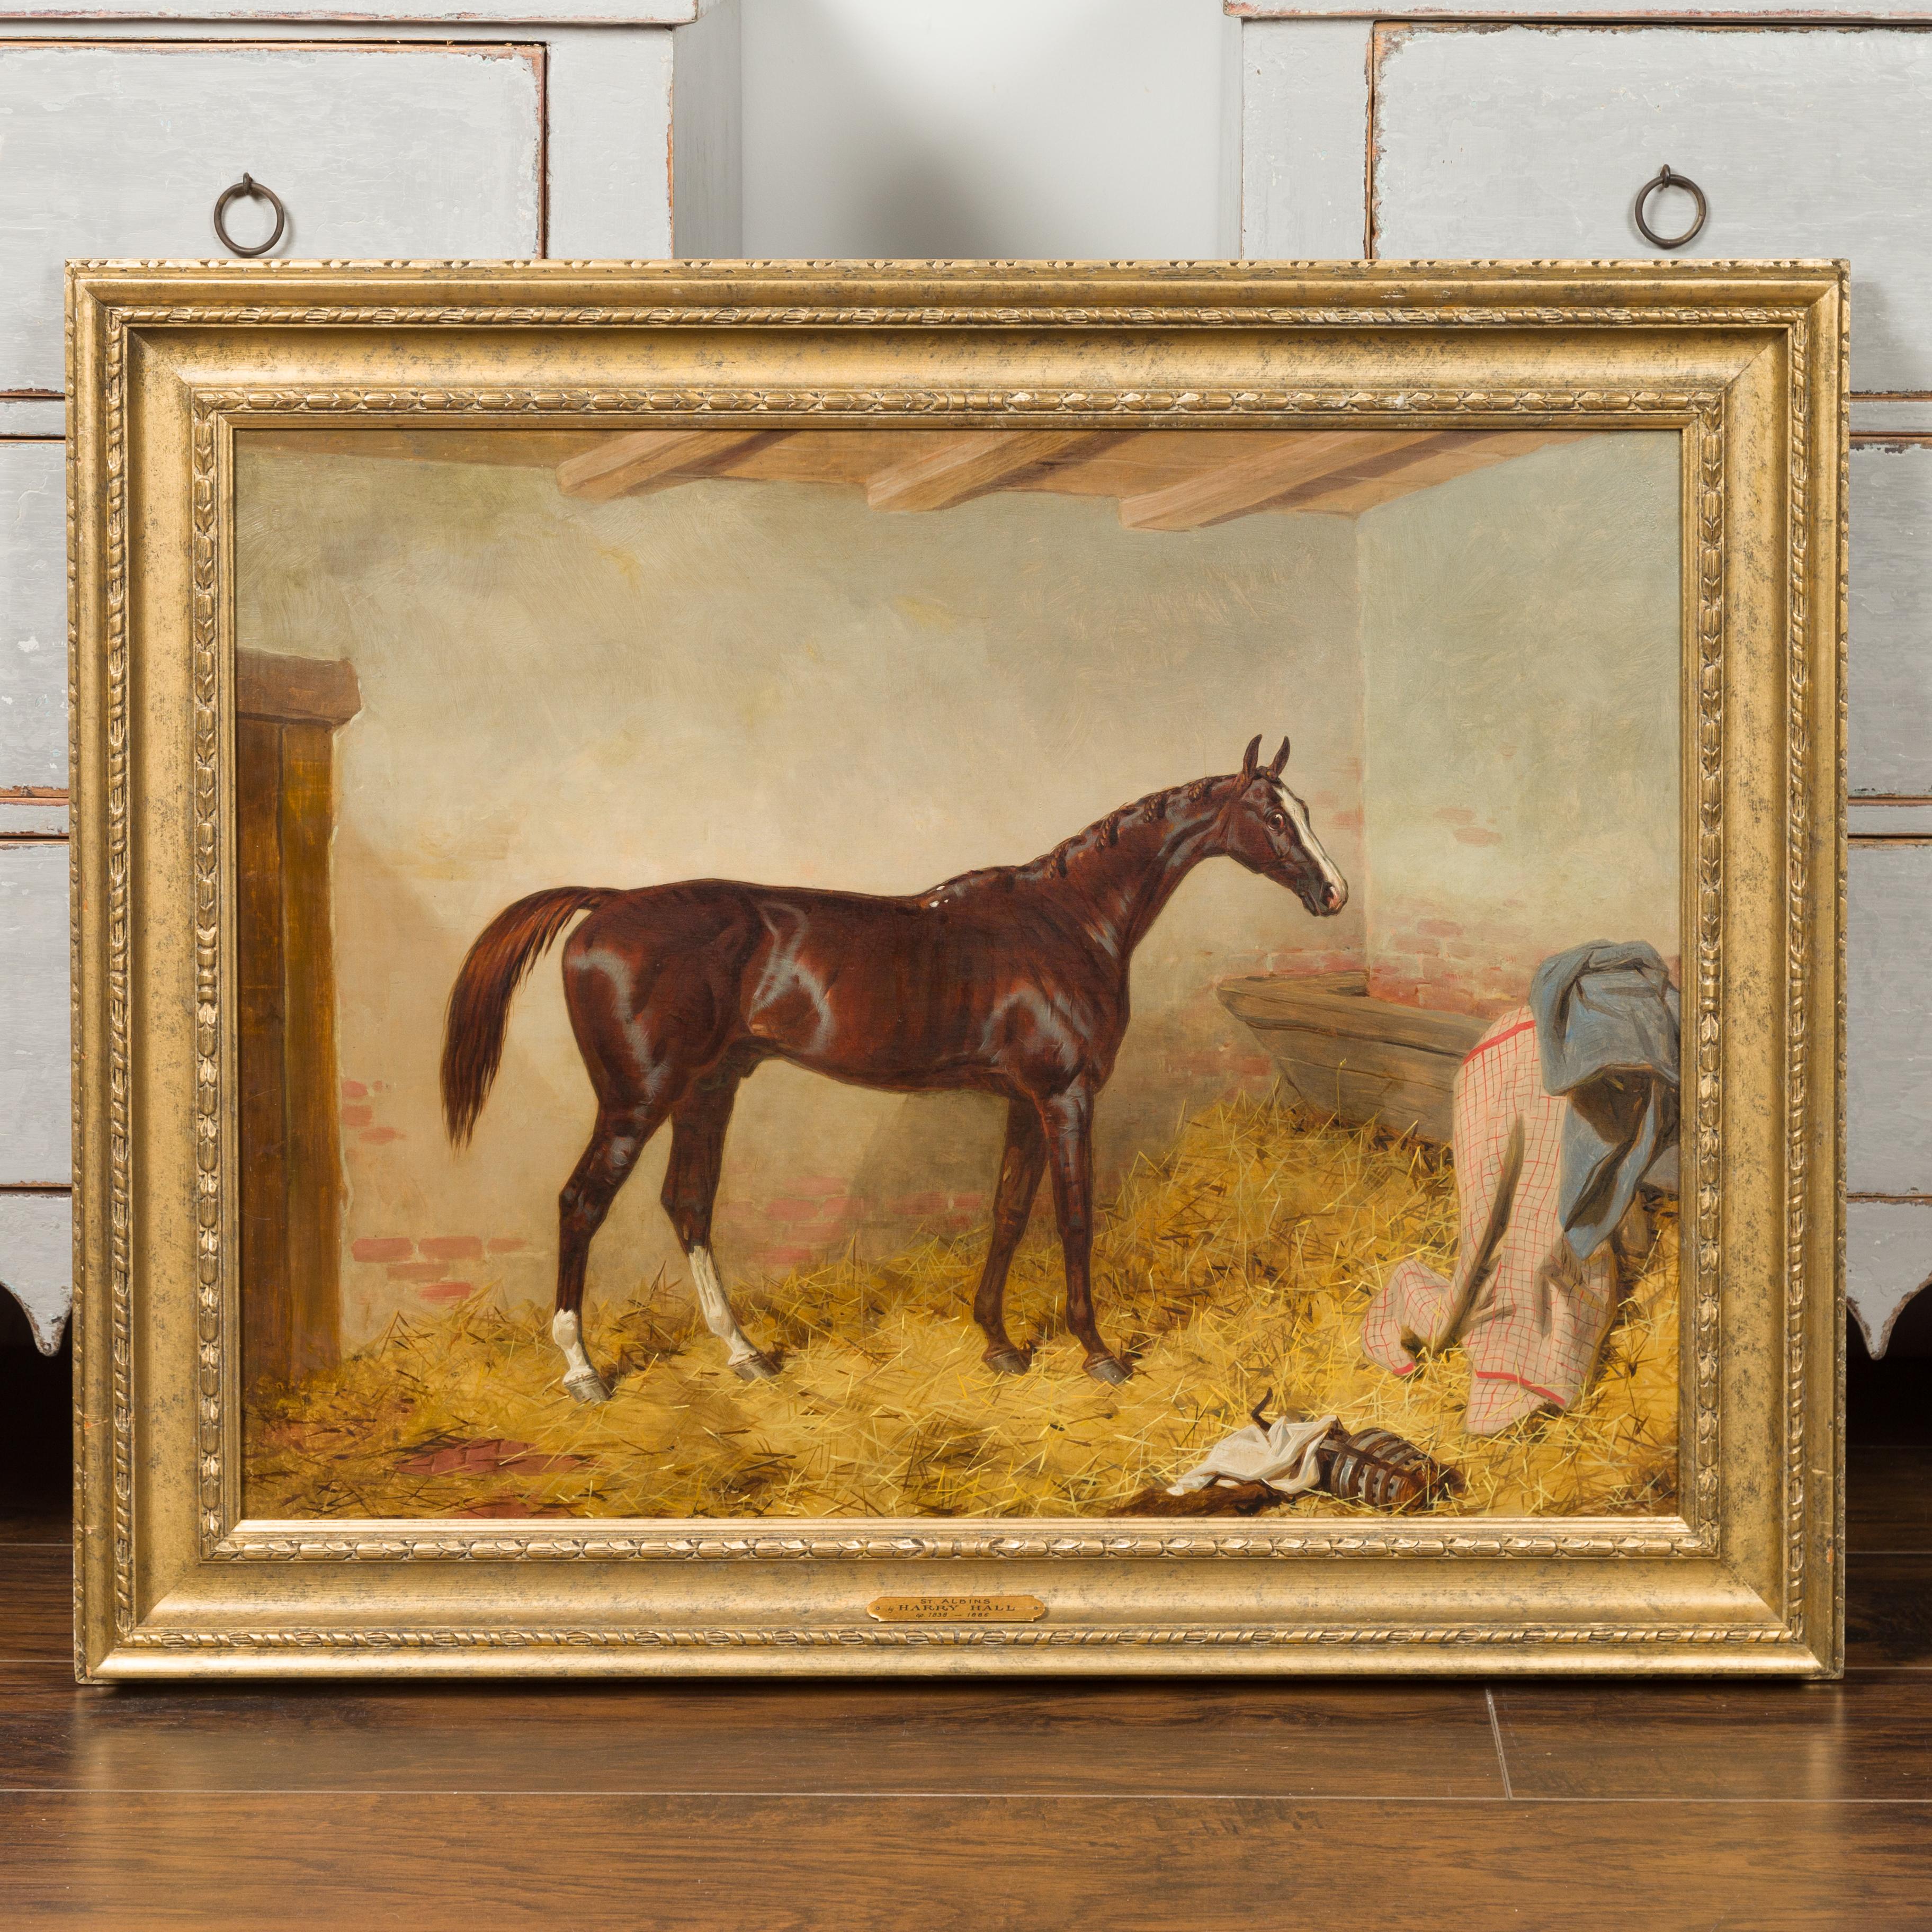 An English equestrian oil on canvas painting from the 19th century, attributed to Harry Hall (British, 1816-1882) in giltwood frame. This horizontal oil on canvas painting depicts the thoroughbred racehorse St. Albans in his stables. His shiny brown